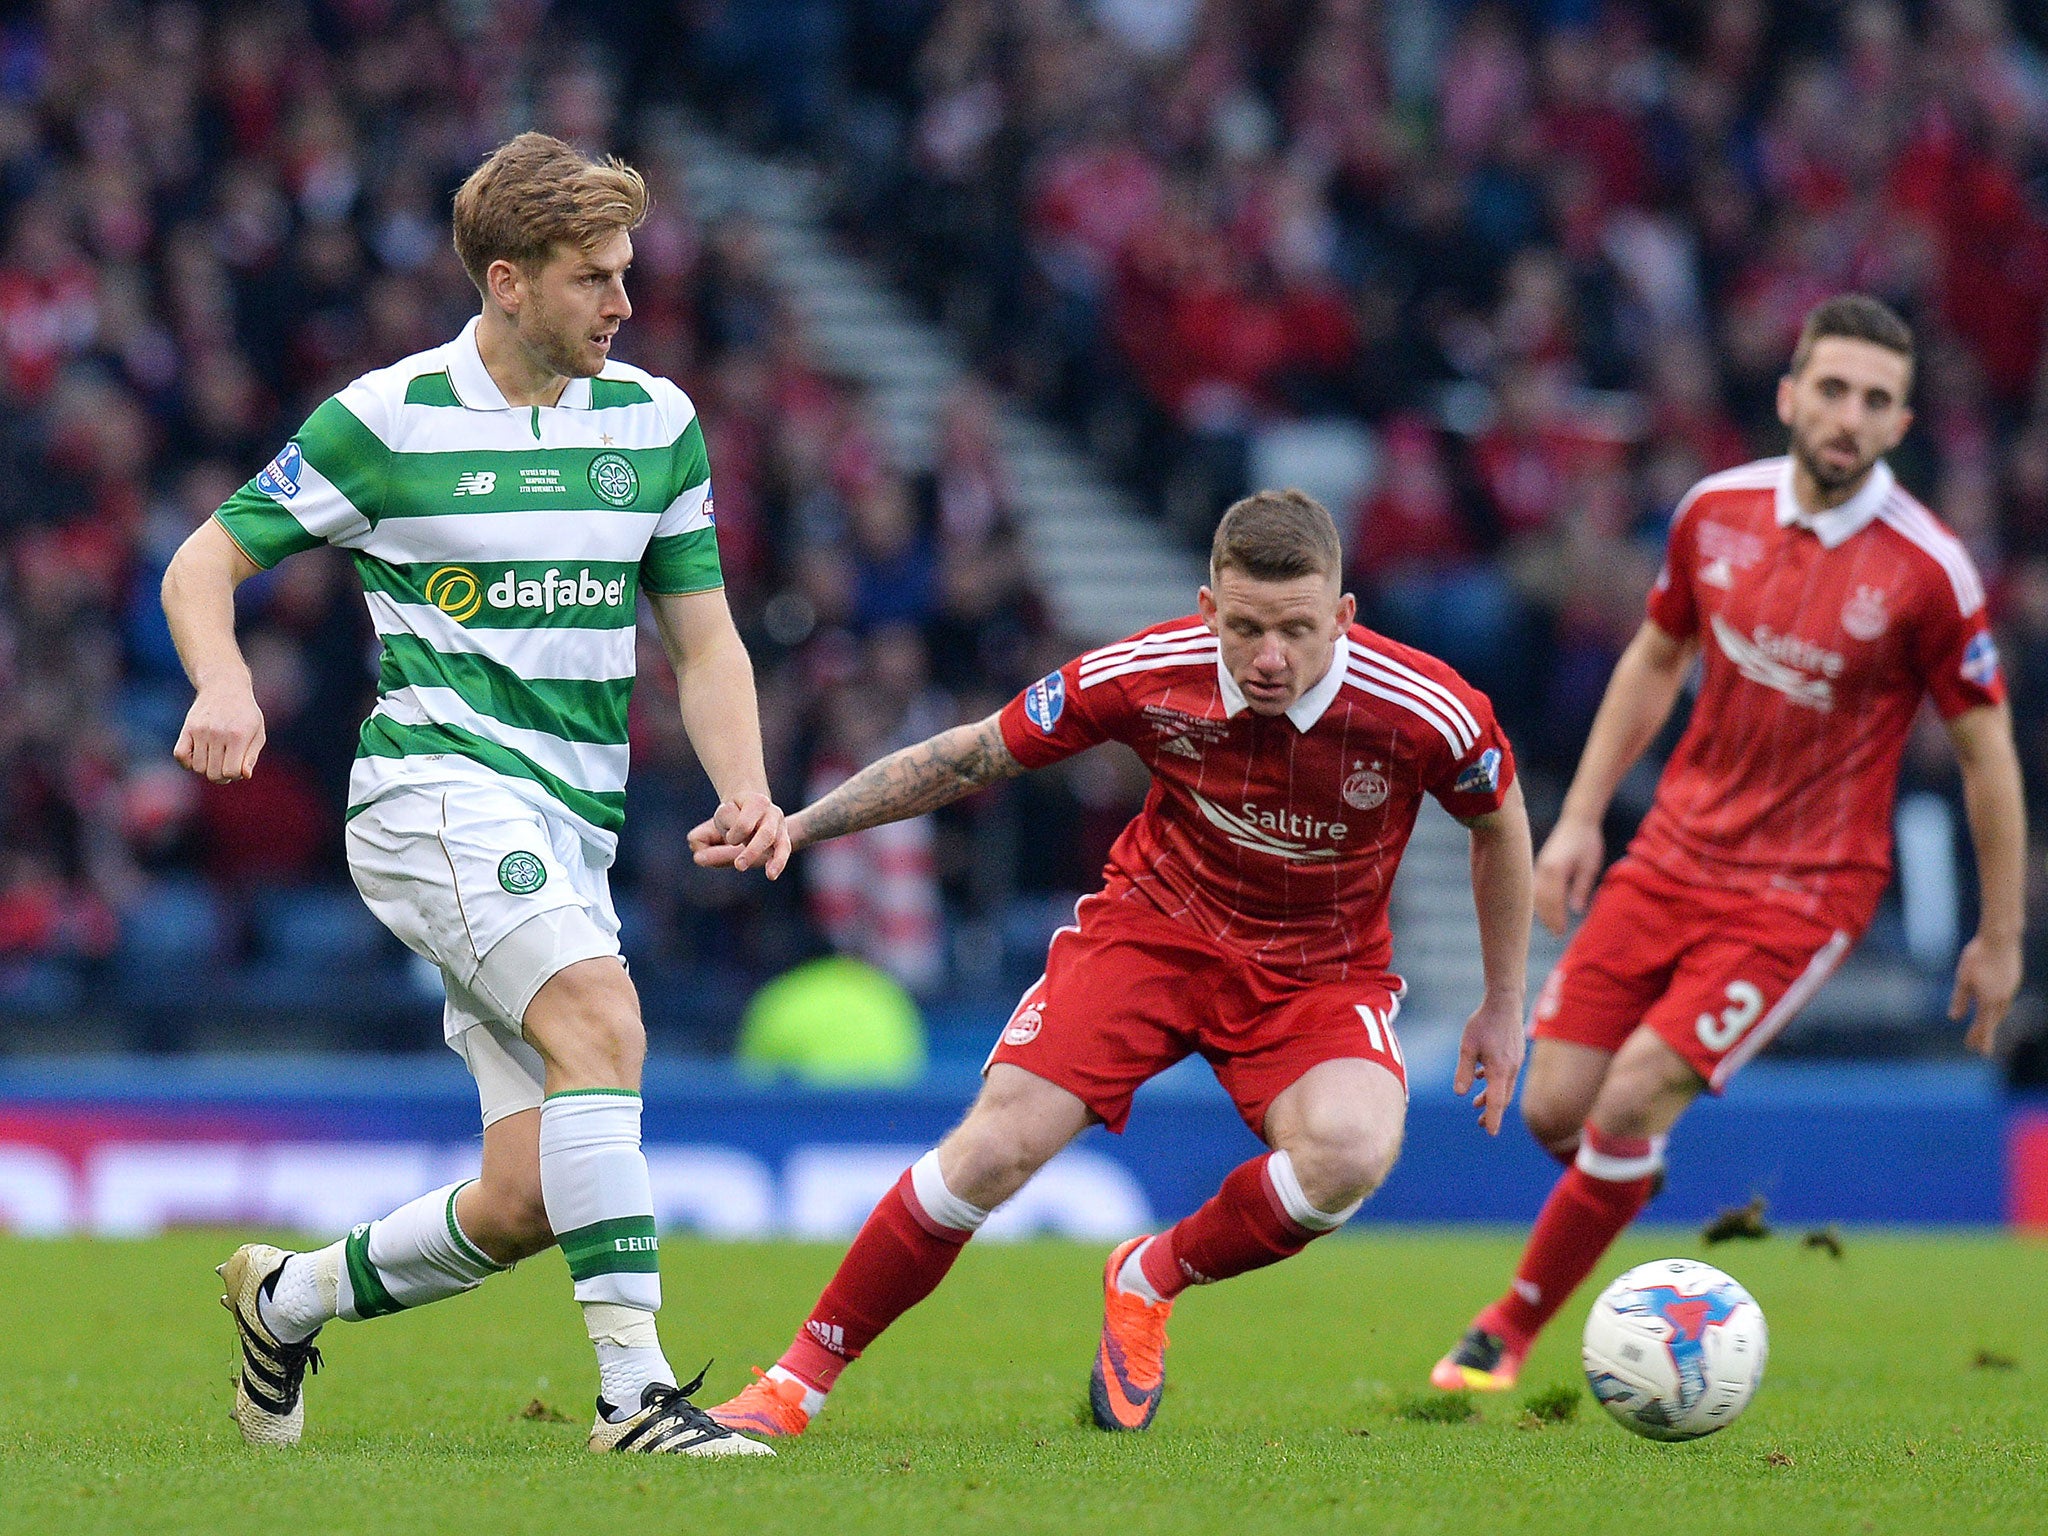 Celtic's Stuart Armstrong looks to get the ball away from Jonny Hayes